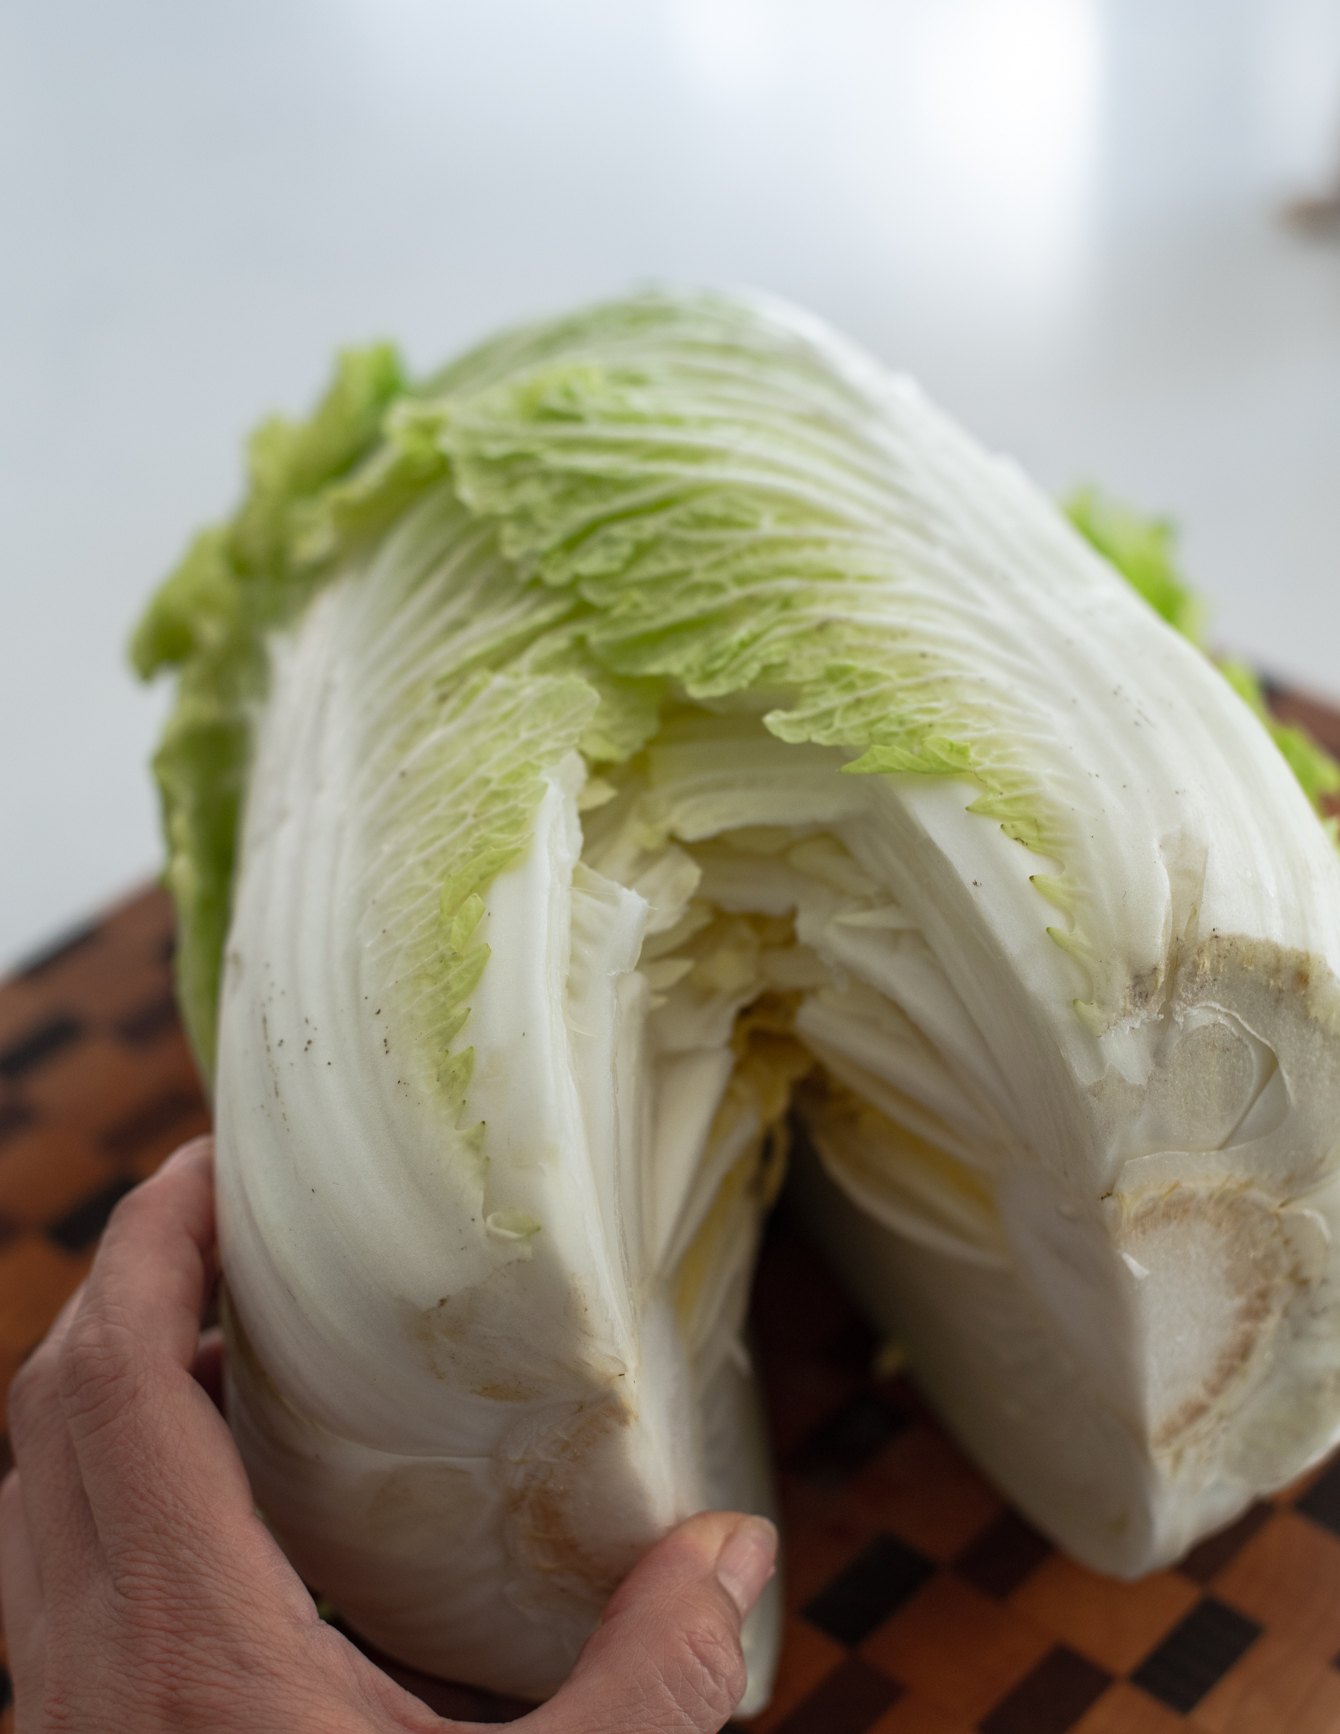 Splitting a head of cabbage in half by hand.